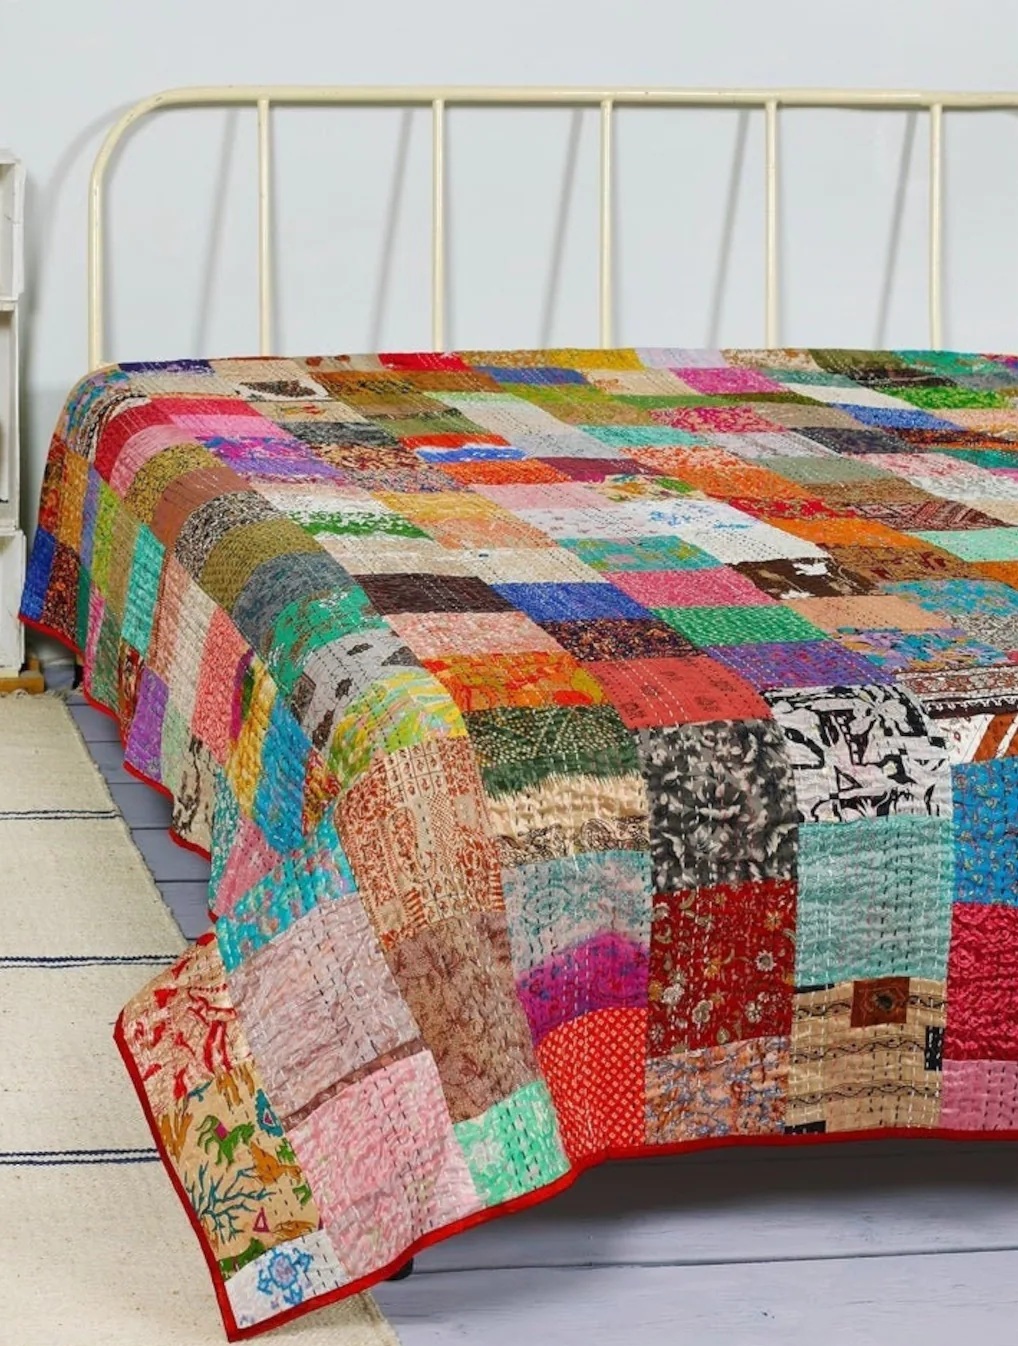 Kantha Blanket,Queen Bed Cover Bedding Throw Tapestry Queen Quilt Kantha Quilt 